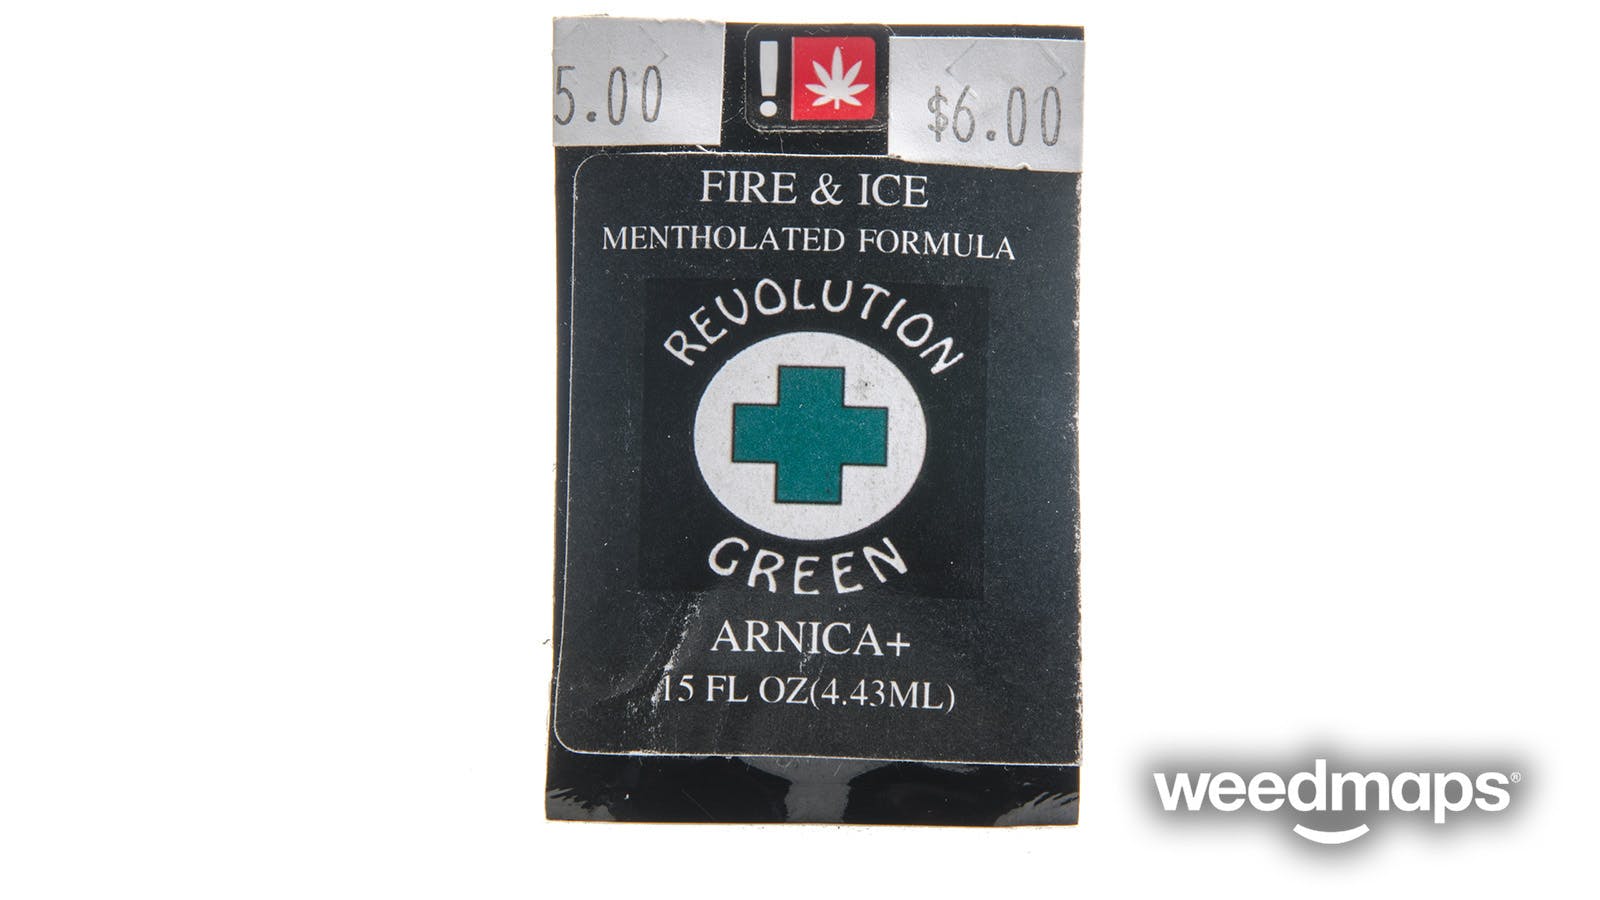 topicals-revolution-green-fire-a-ice-trial-size-15-1333